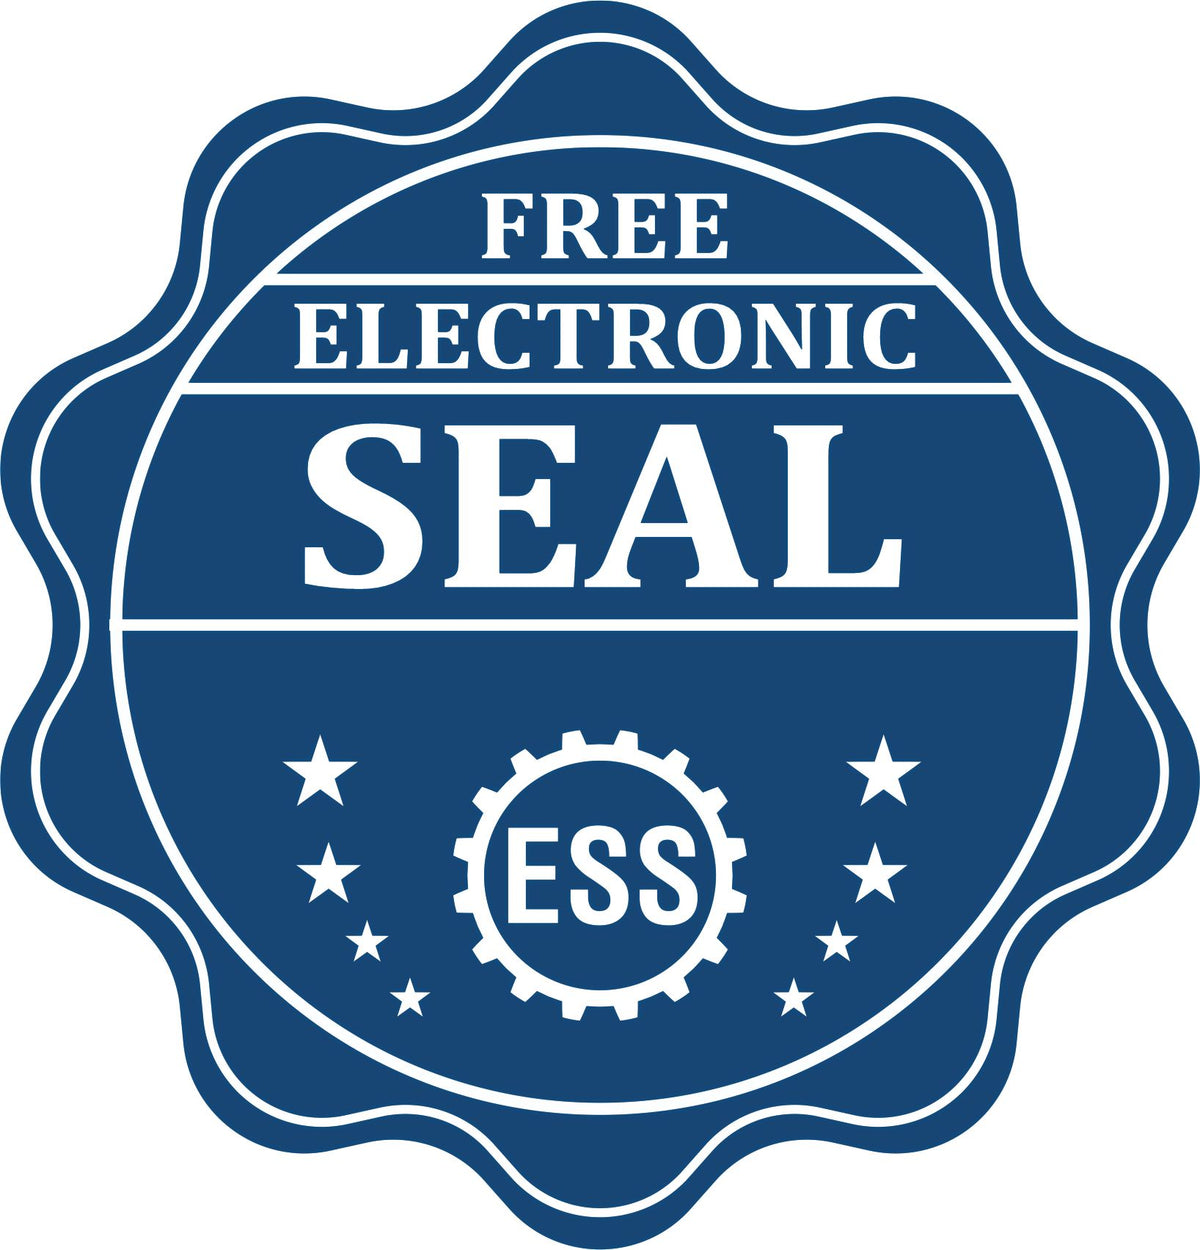 A badge showing a free electronic seal for the Washington Professional Engineer Seal Stamp with stars and the ESS gear on the emblem.